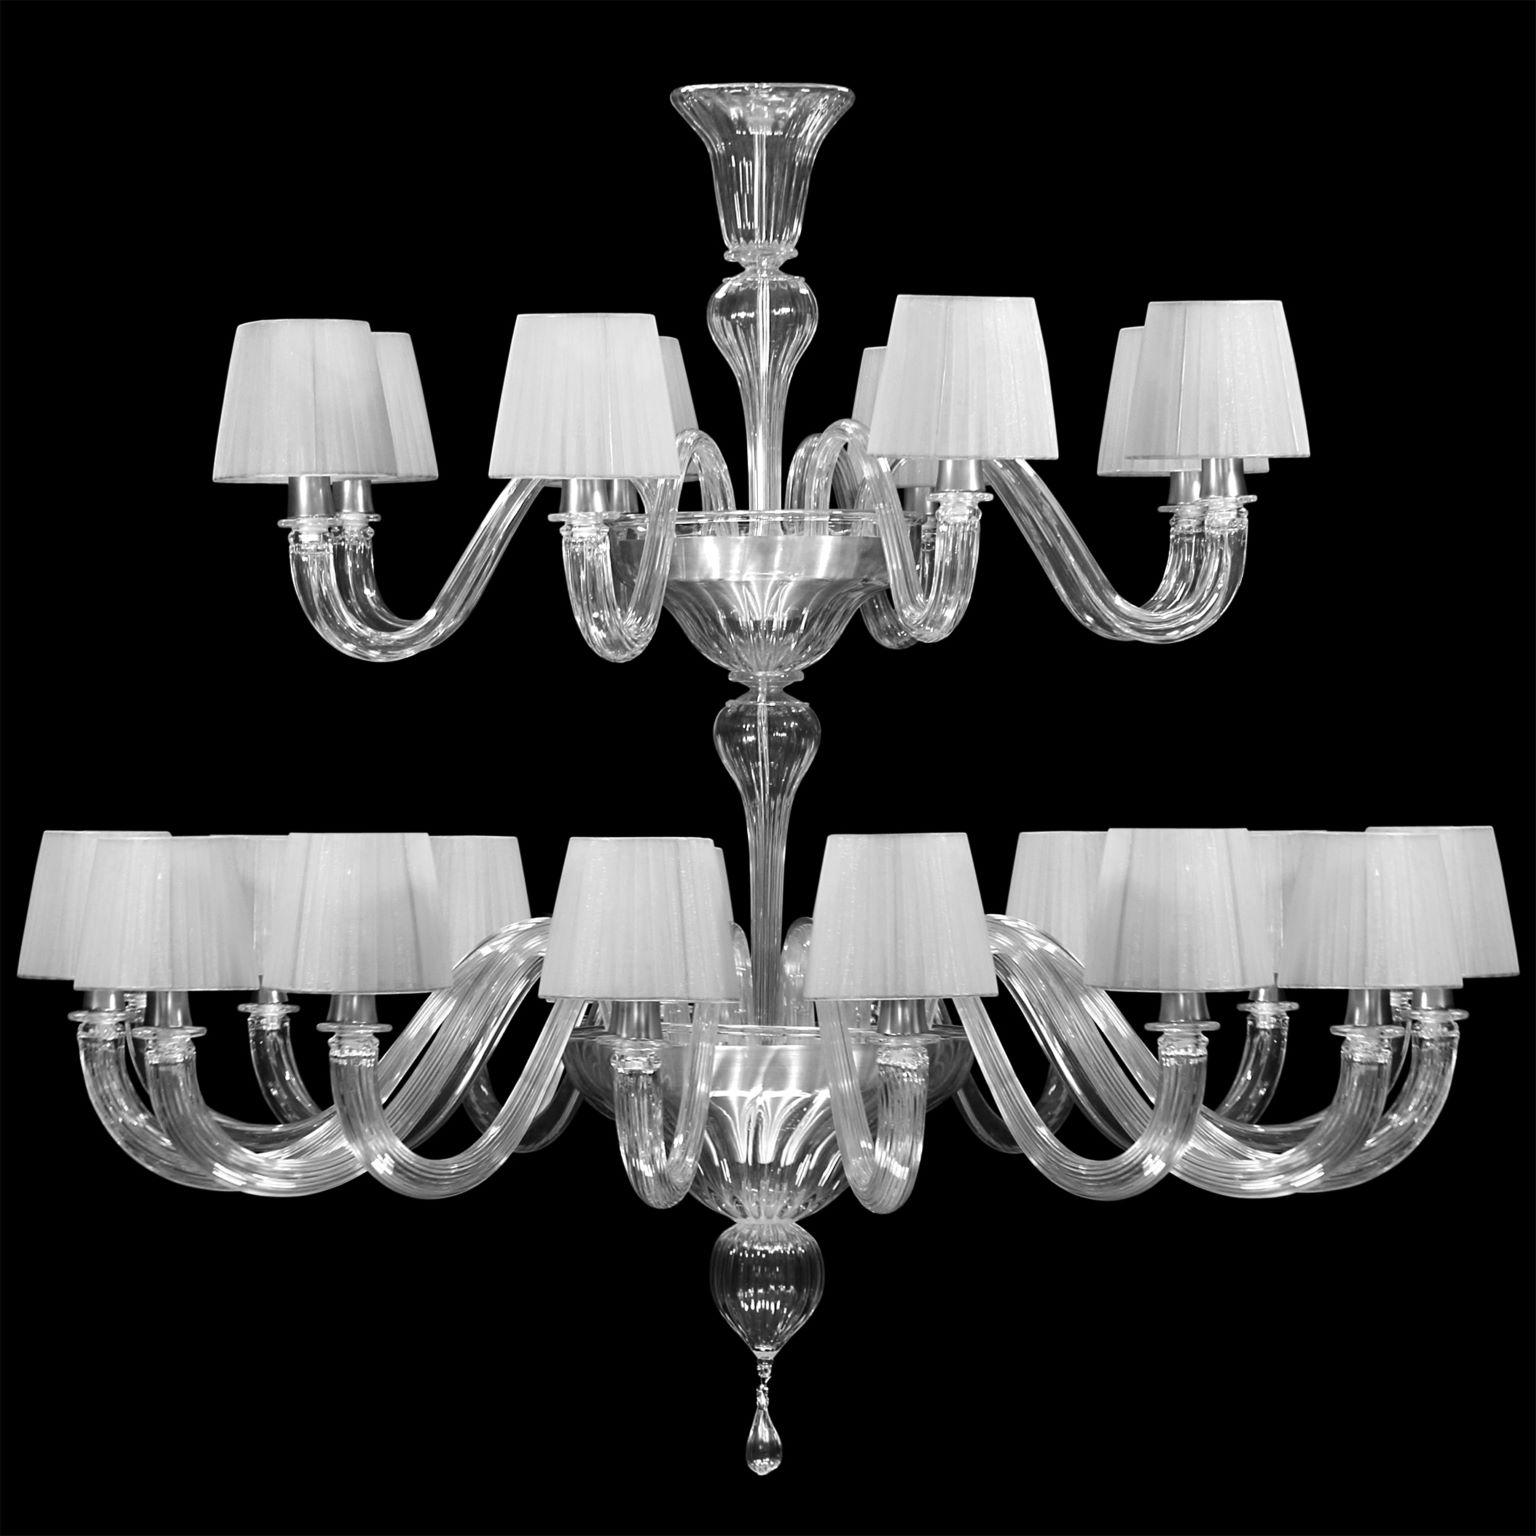 Chapeau chandelier 16+8 lights crystal Murano glass, in two tiers, silver organza handmade lampshades by Multiforme.
Chapeau is a Classic and essential chandelier, it is handcrafted using high quality materials in Murano glass and handmade cotton